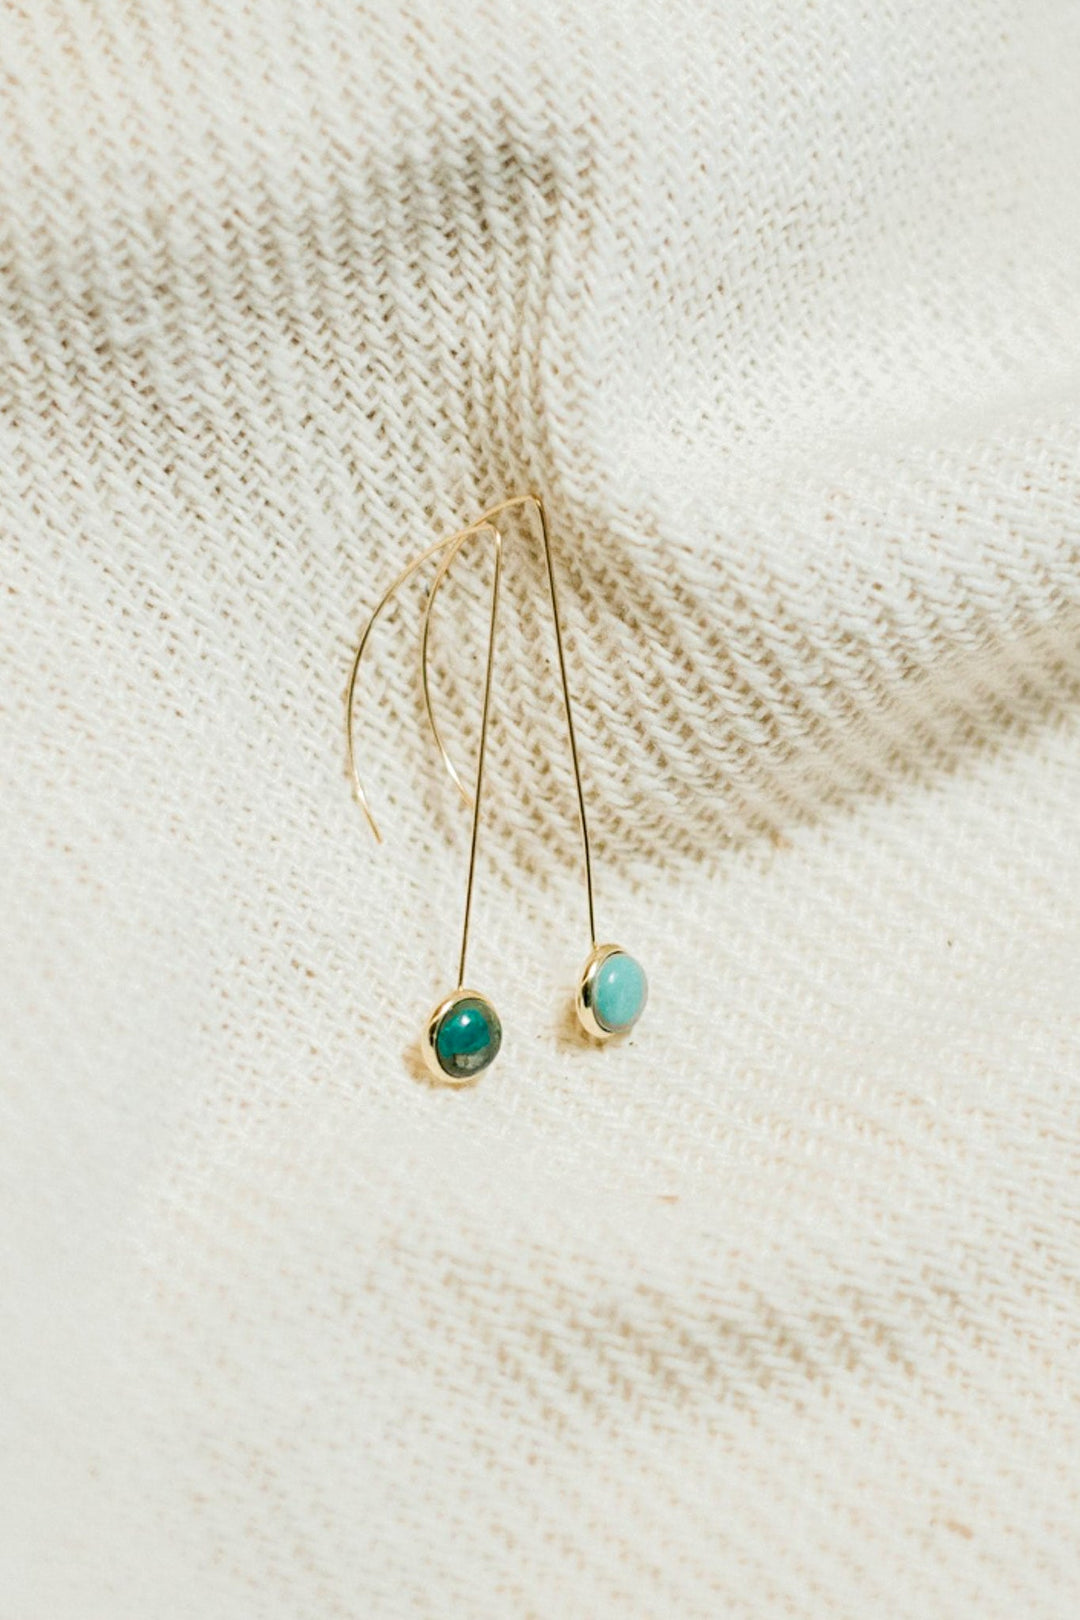 Anther turquoise earrings - Heyday